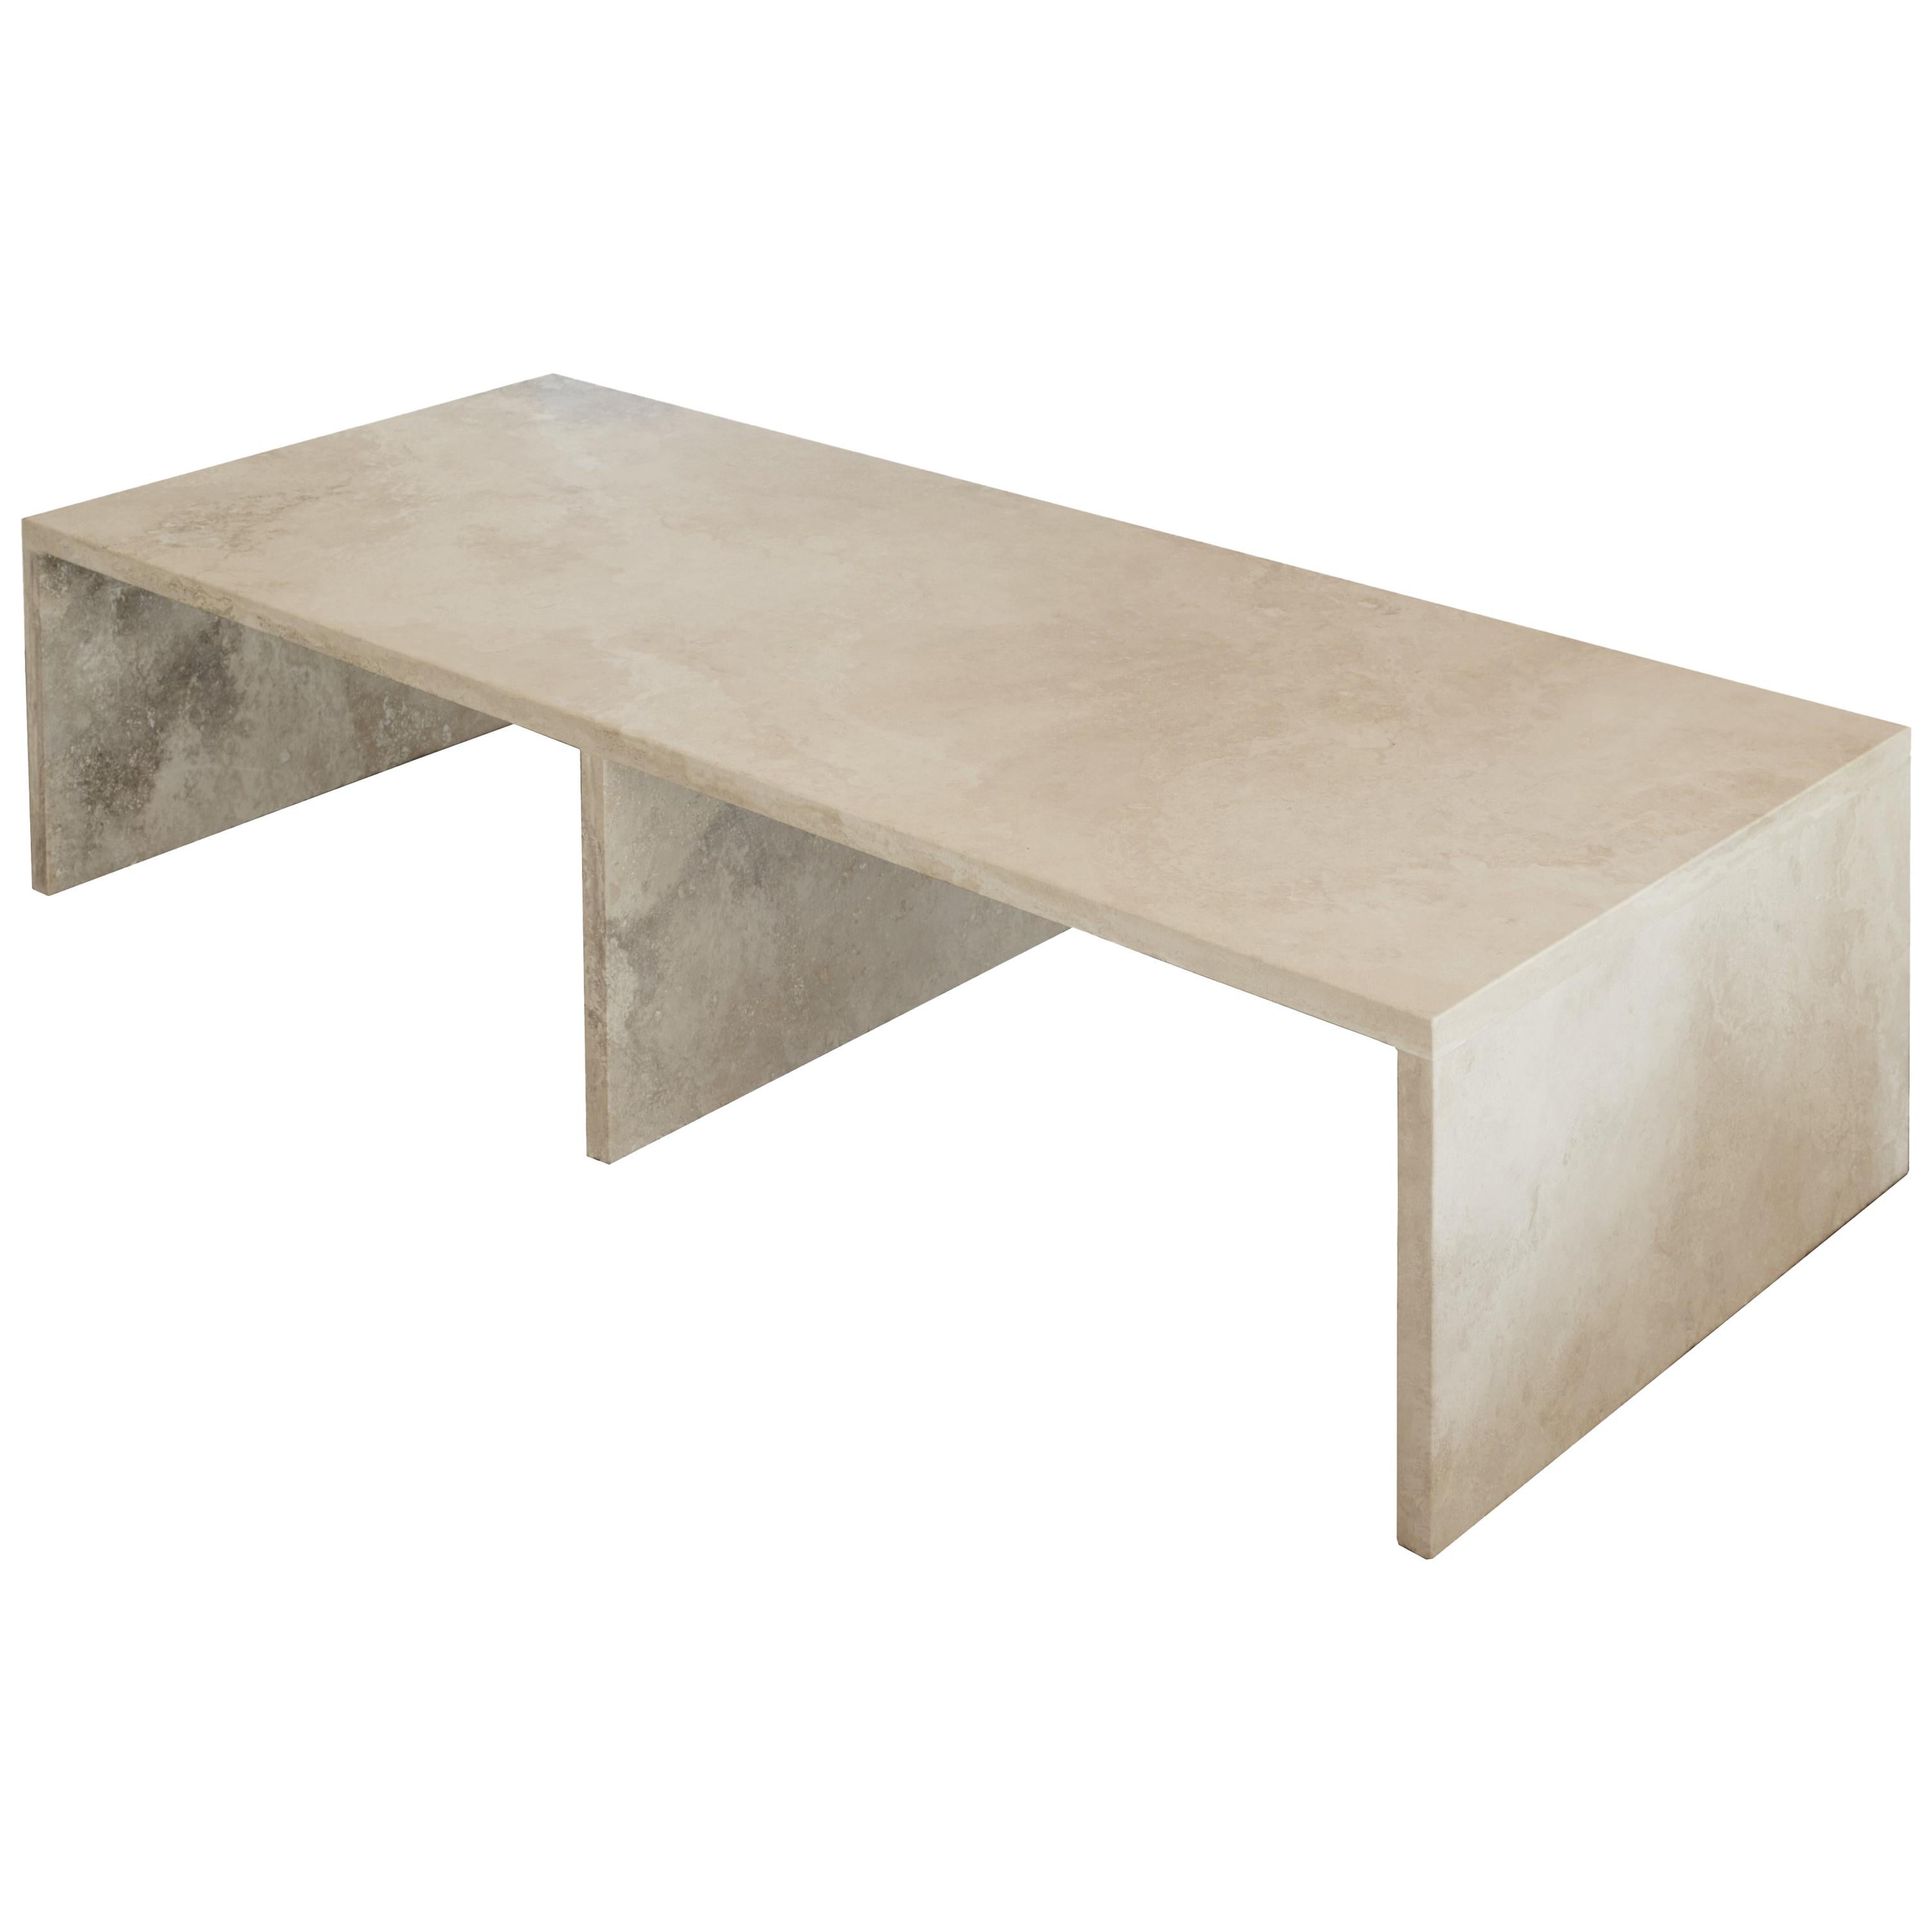 AA106.1 Travertine Coffee Table by Amee Allsop